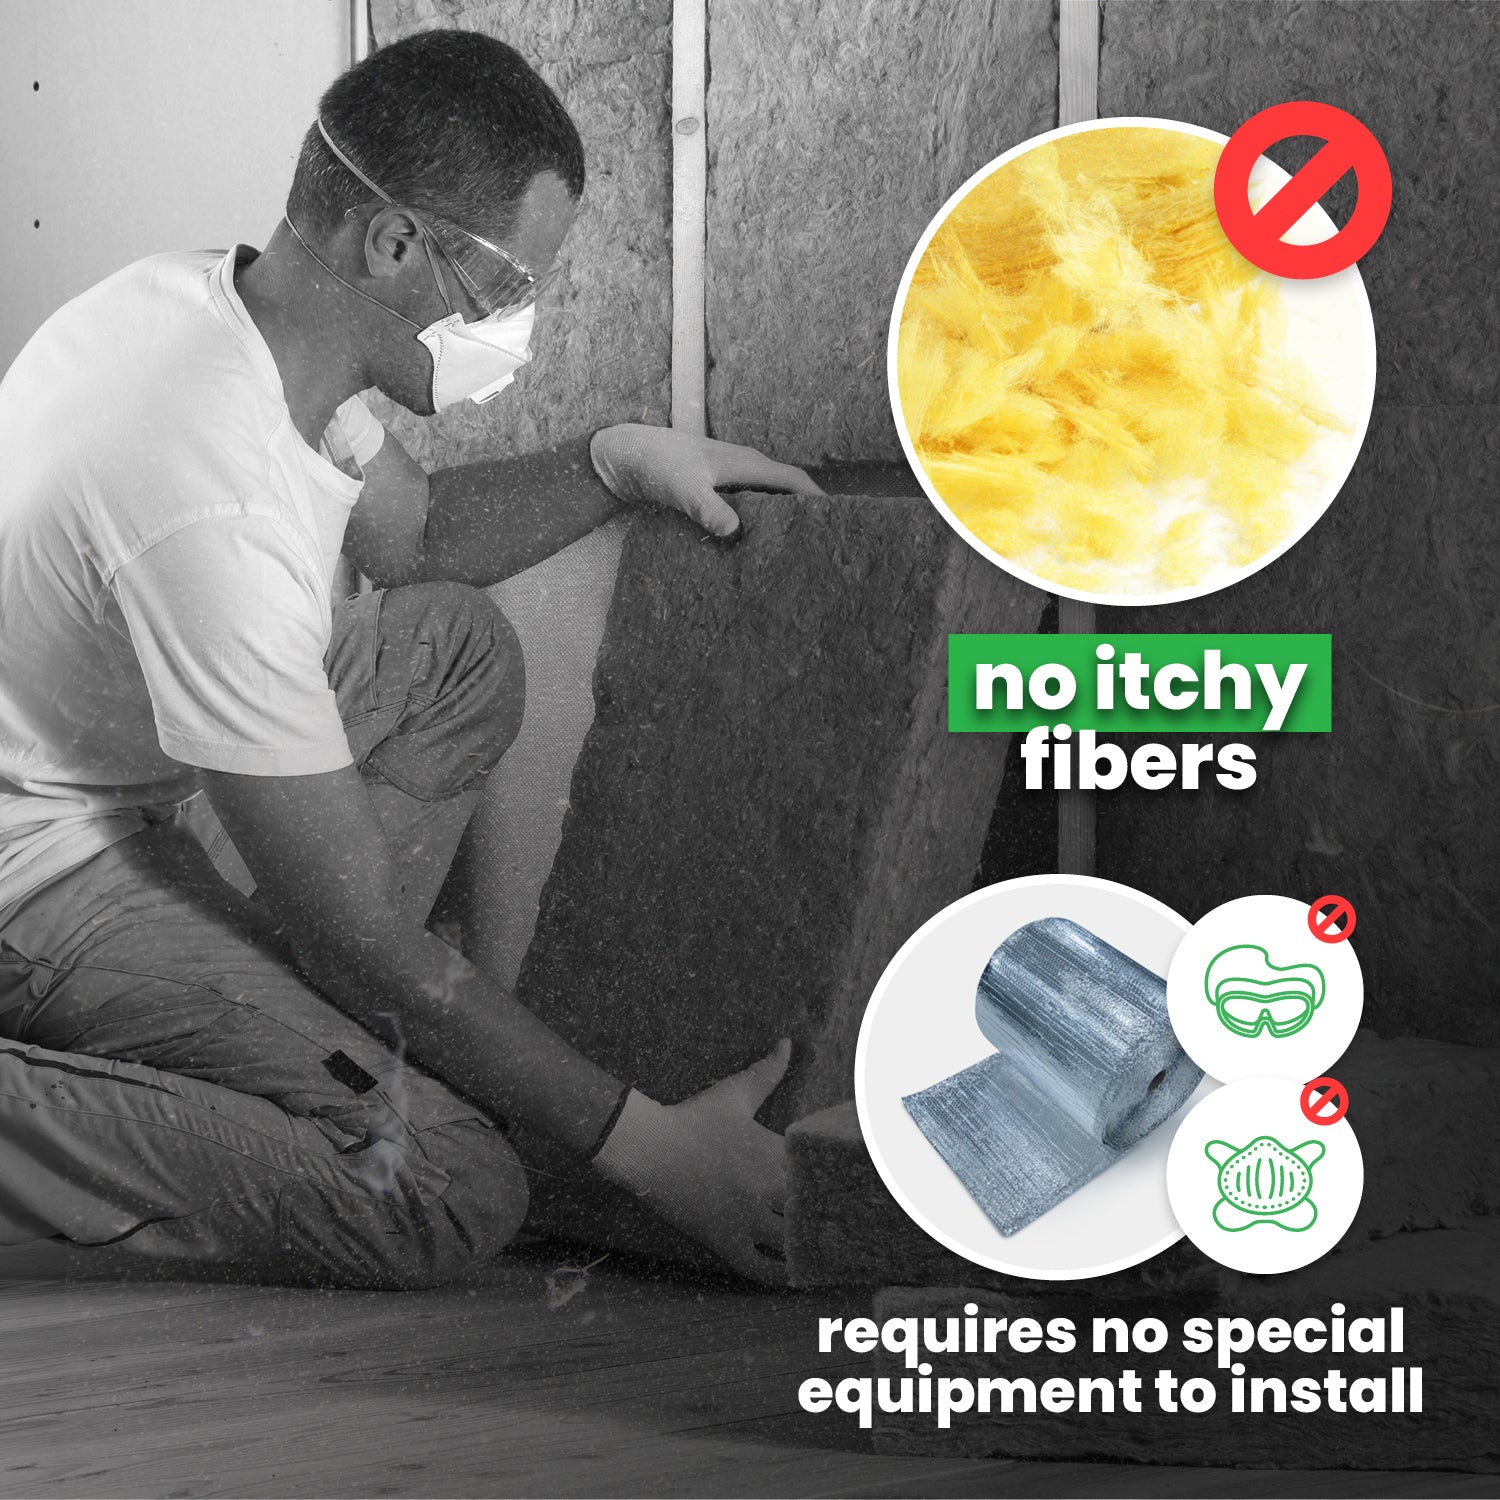 No itchy fibers, requires no special equipment to install